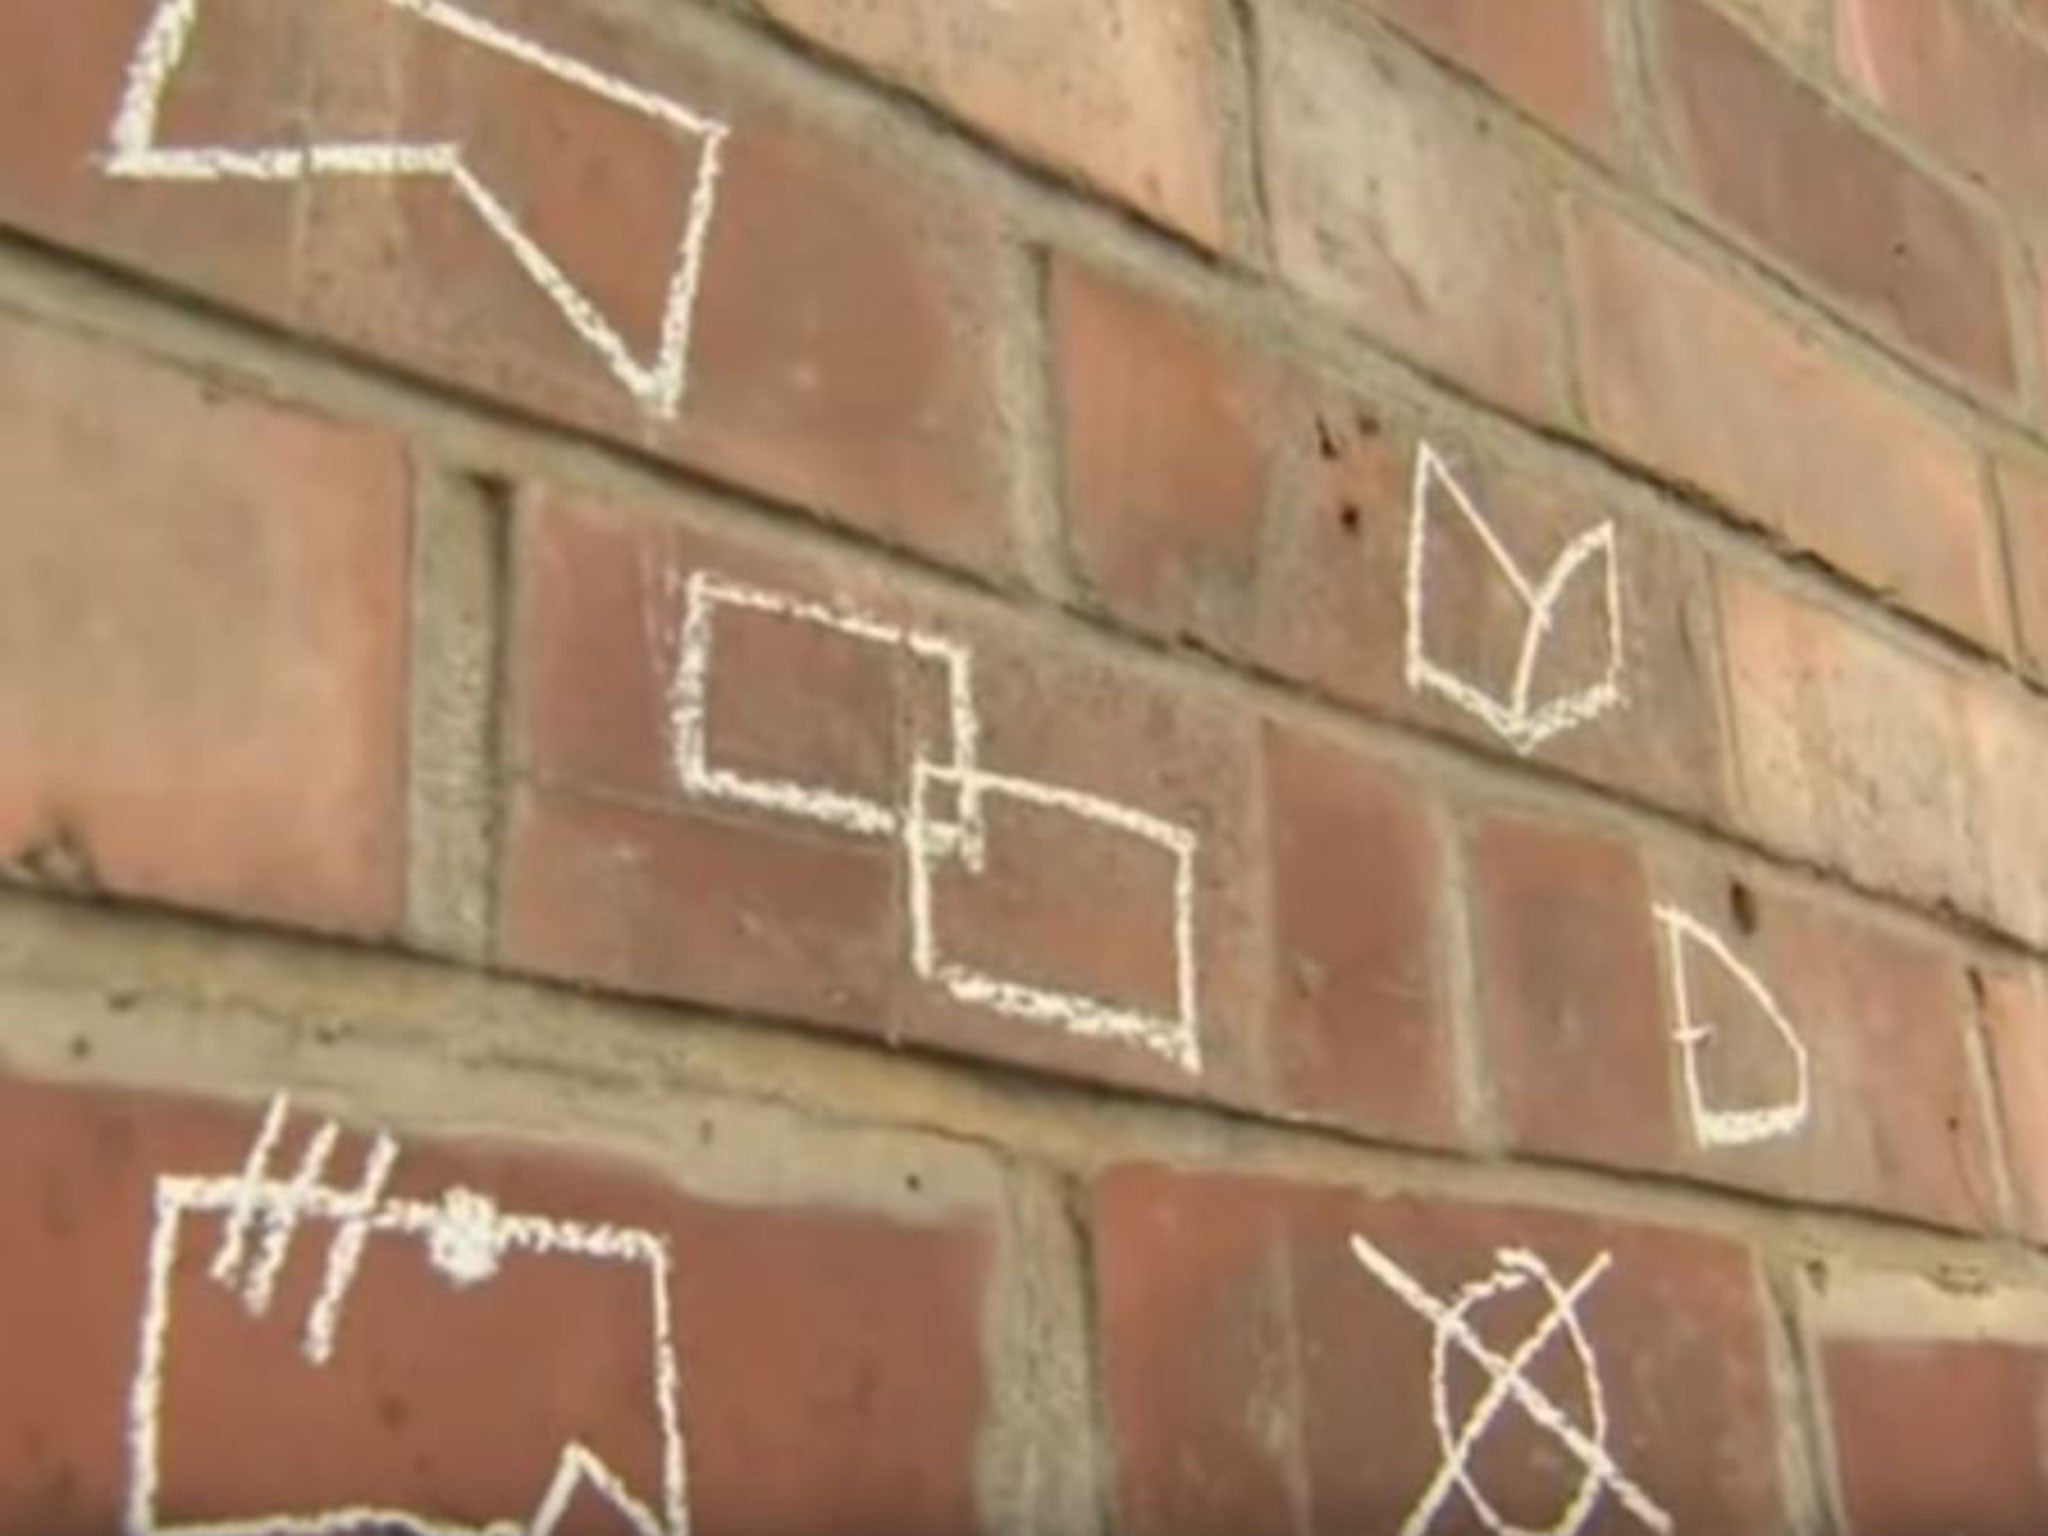 The symbols, that have been spotted on roads, kerbs and walls, are said to be a criminal code